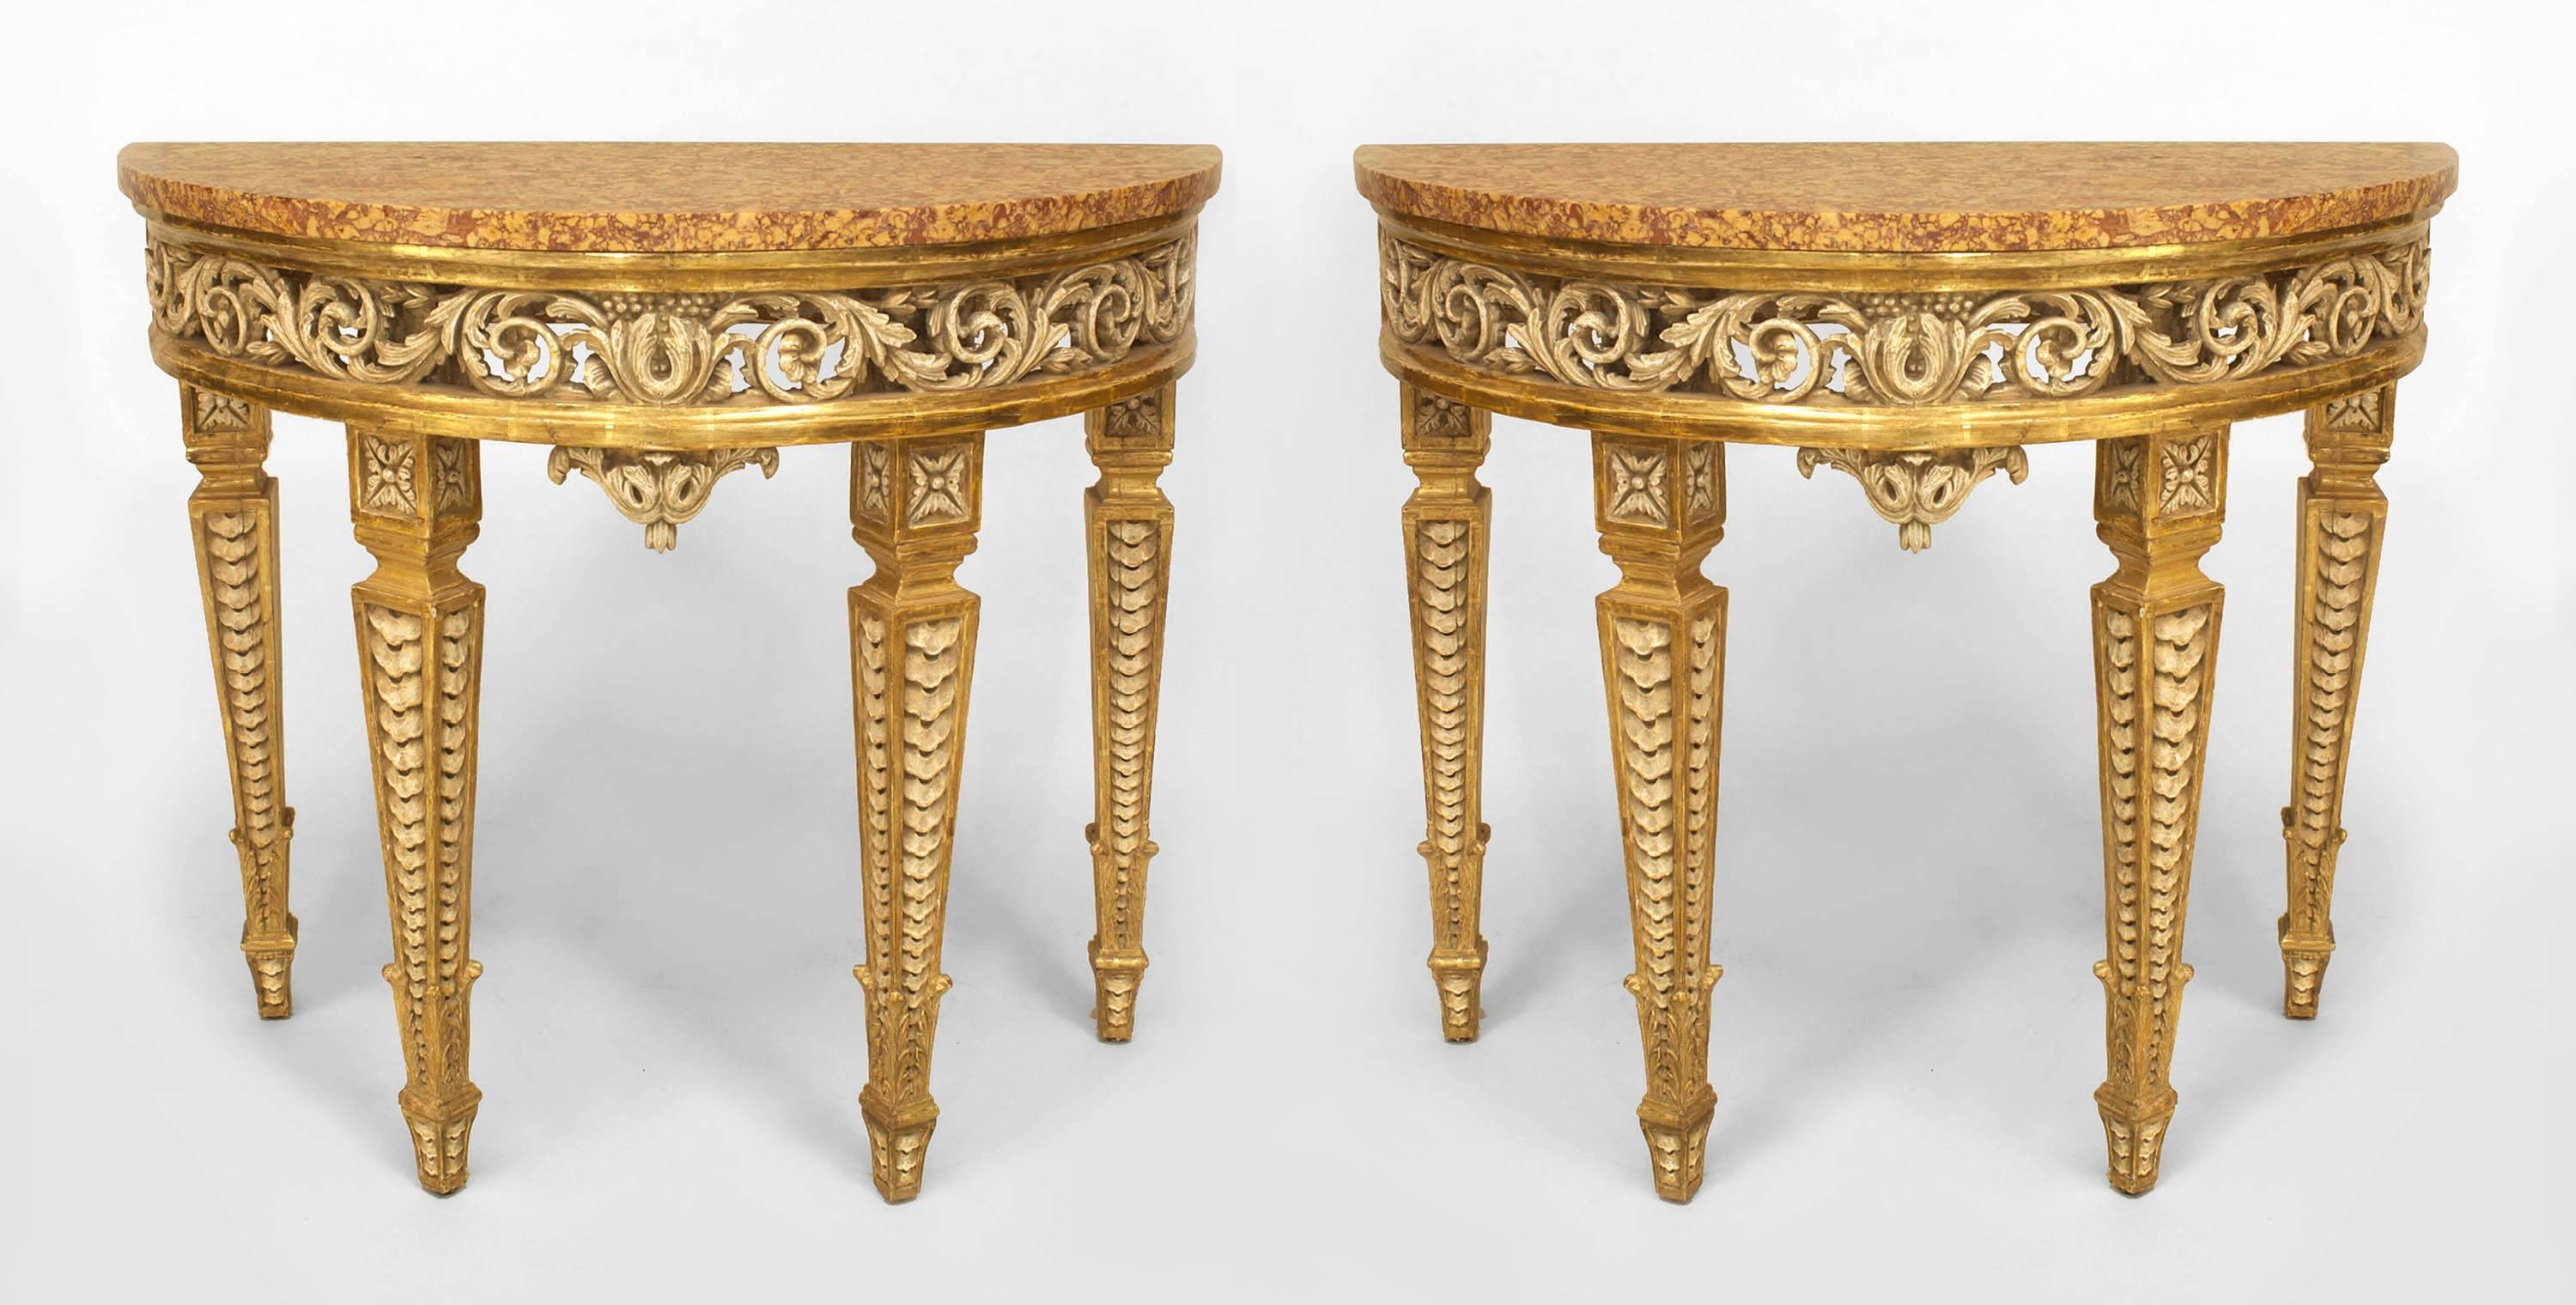 Pair of Italian Neo-classic (18th Century) cream painted & parcel gilt demilune console tables with a pierced apron supported on carved square tapered legs with later brocatelle marble tops (White marble tabletops available upon request) (PRICED AS